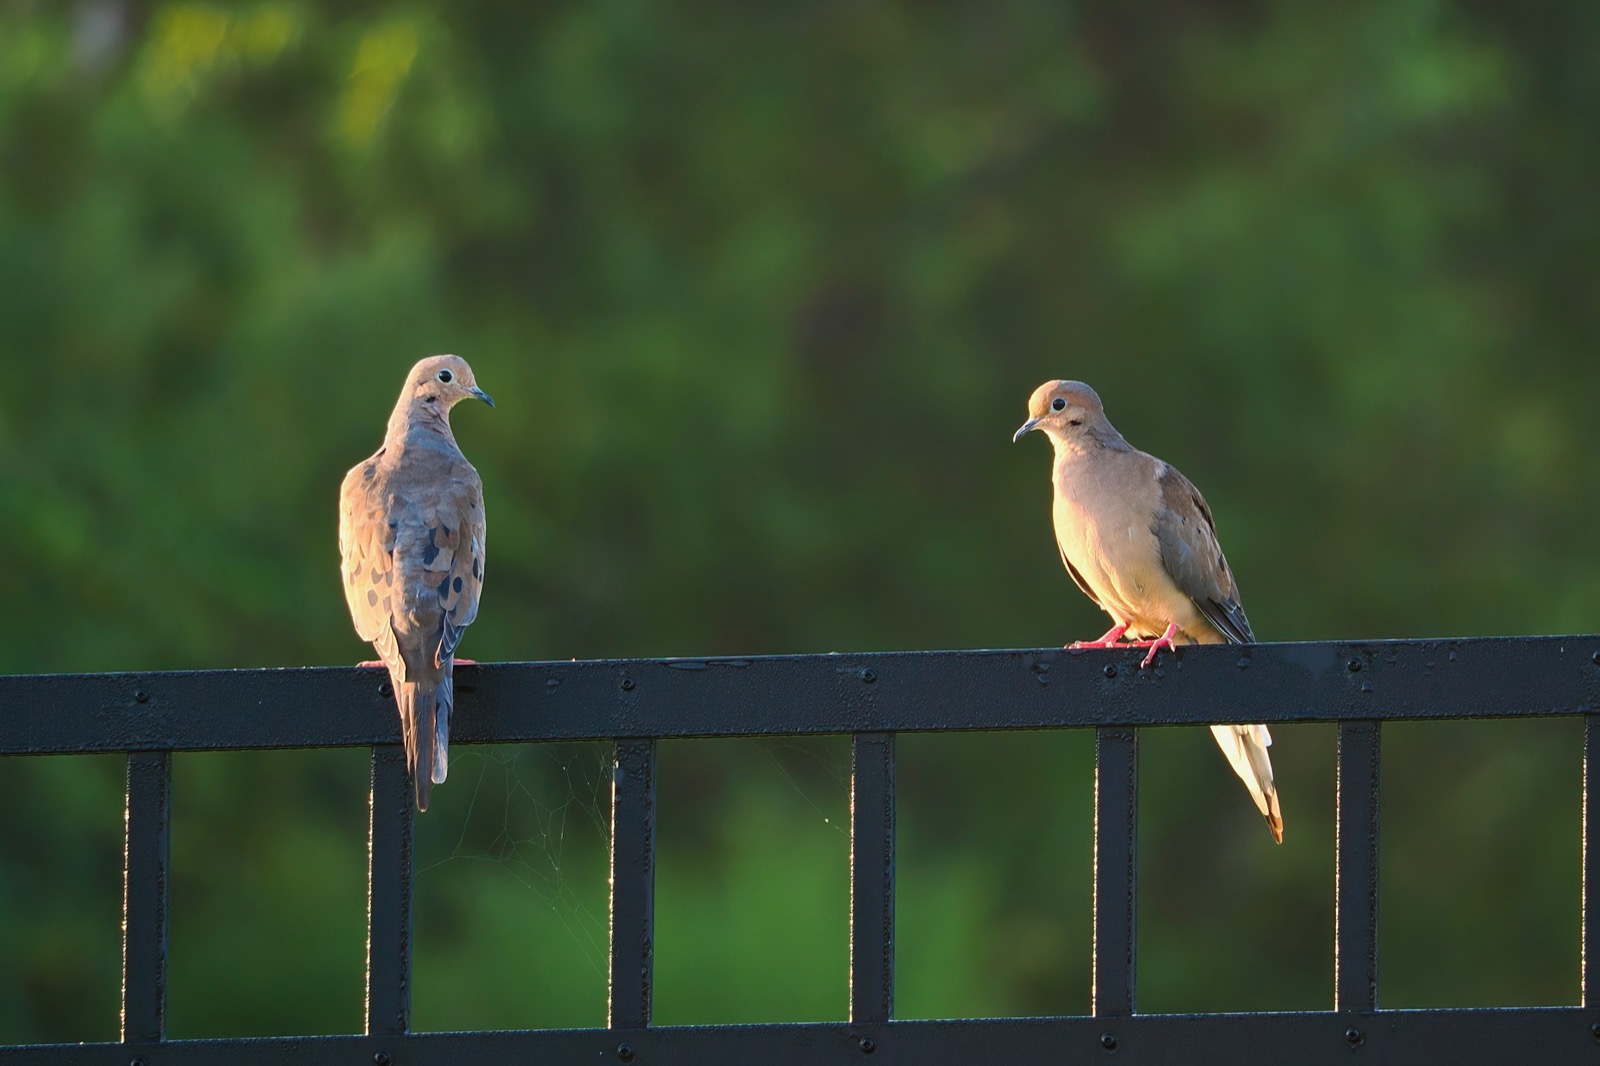 Pair of mourning doves perched on a metal fence in morning light